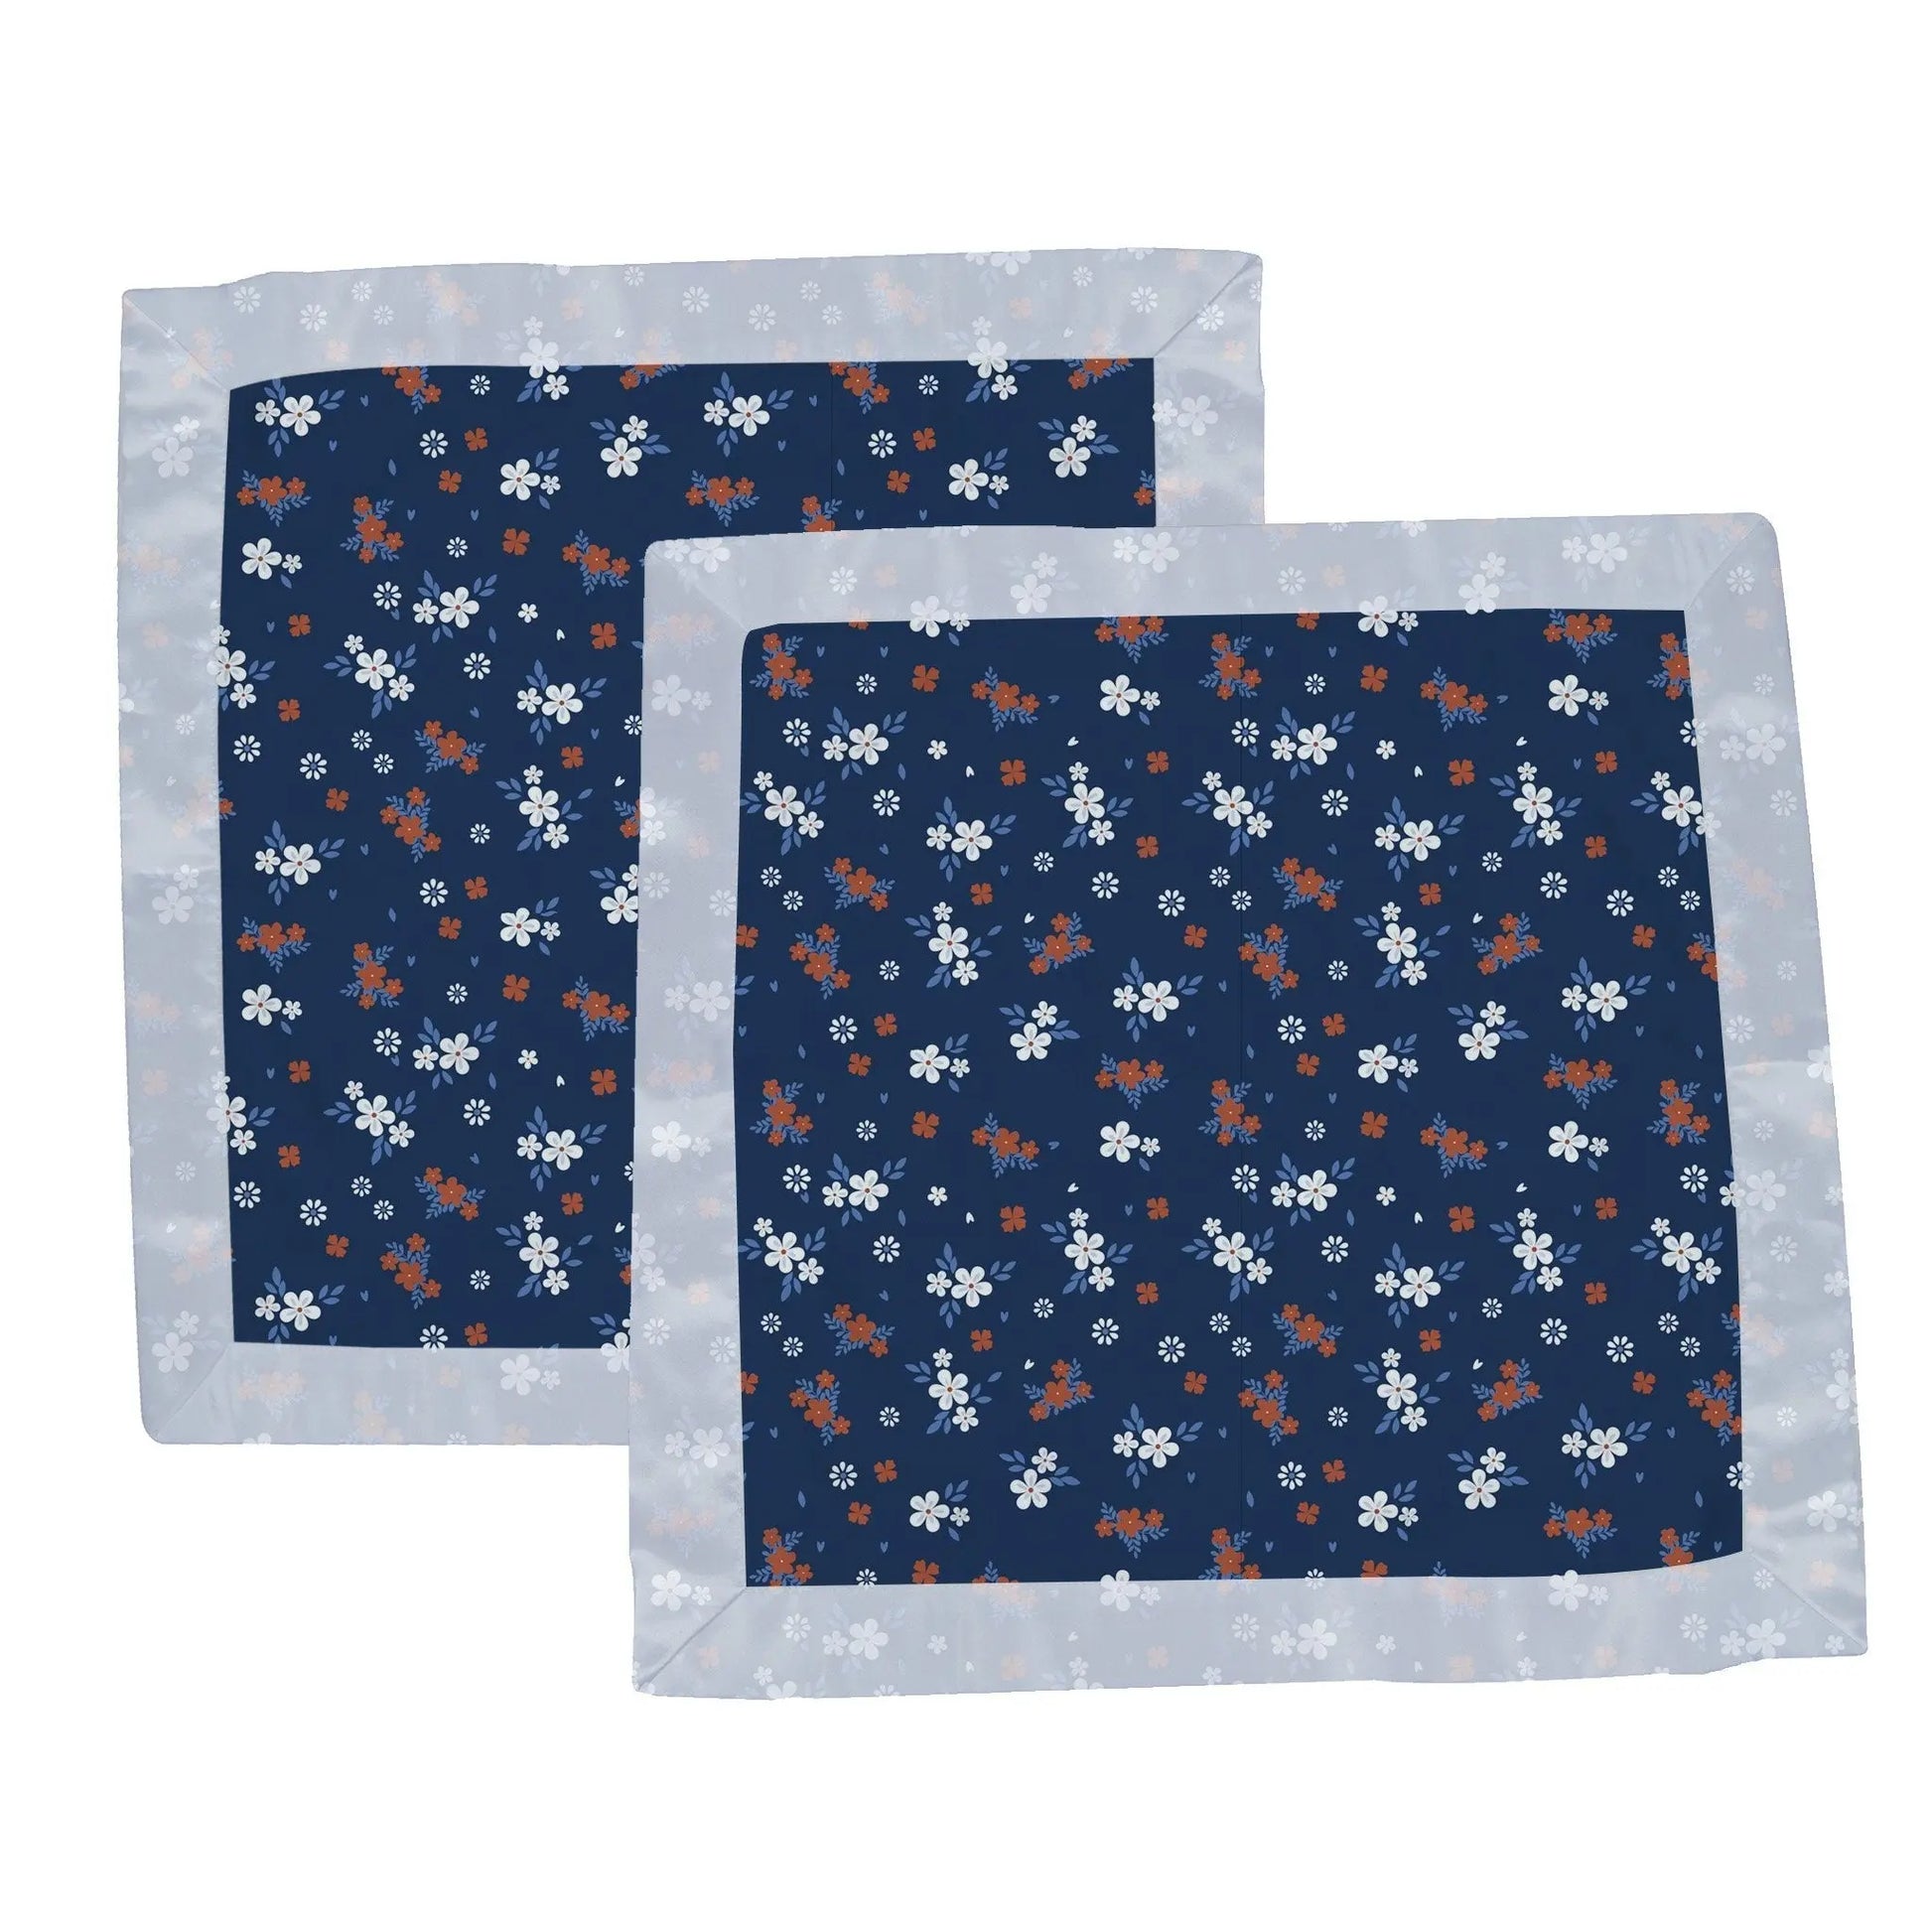 Security Blanket 2PK | Bamboo Fabric - Serenity Floral Newcastle Classics